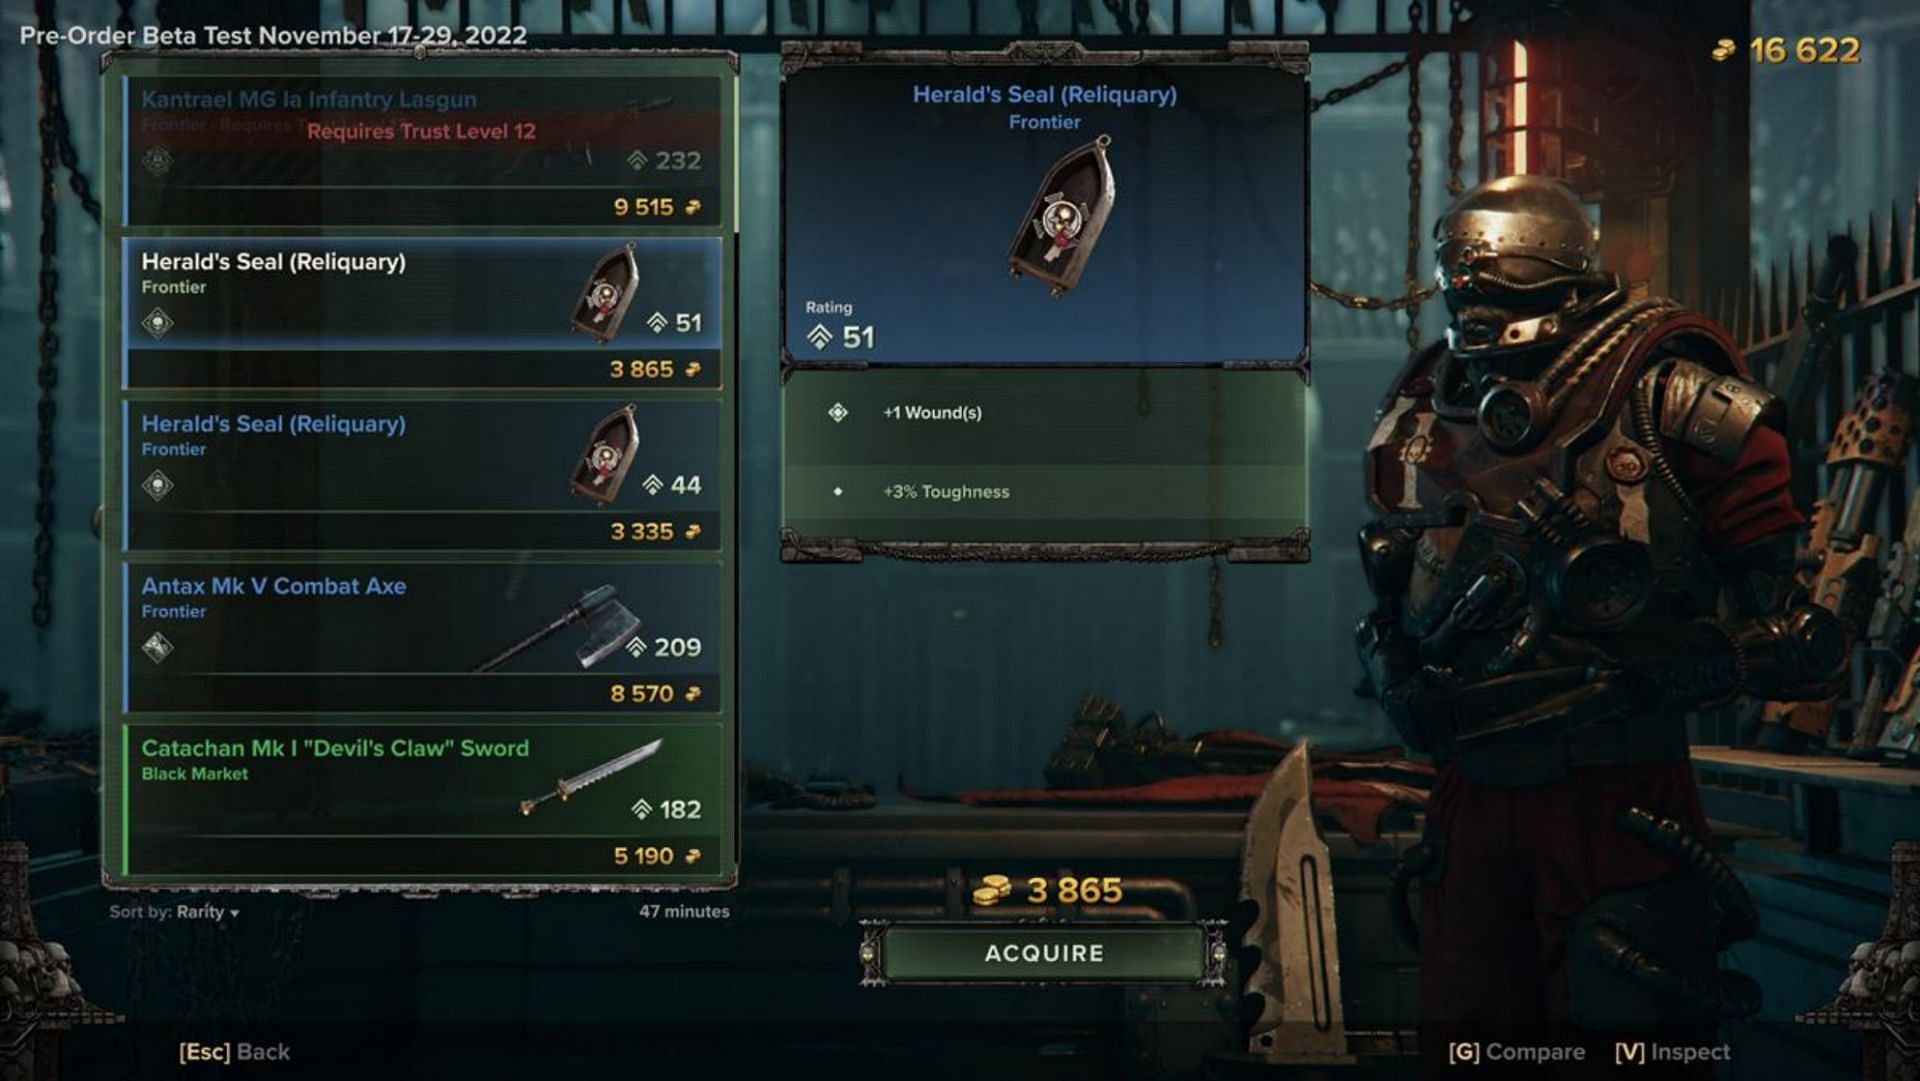 Within Warhammer 40K: Darktide, keep an eye out for items that offer more Wounds (Image via Fatshark Games)